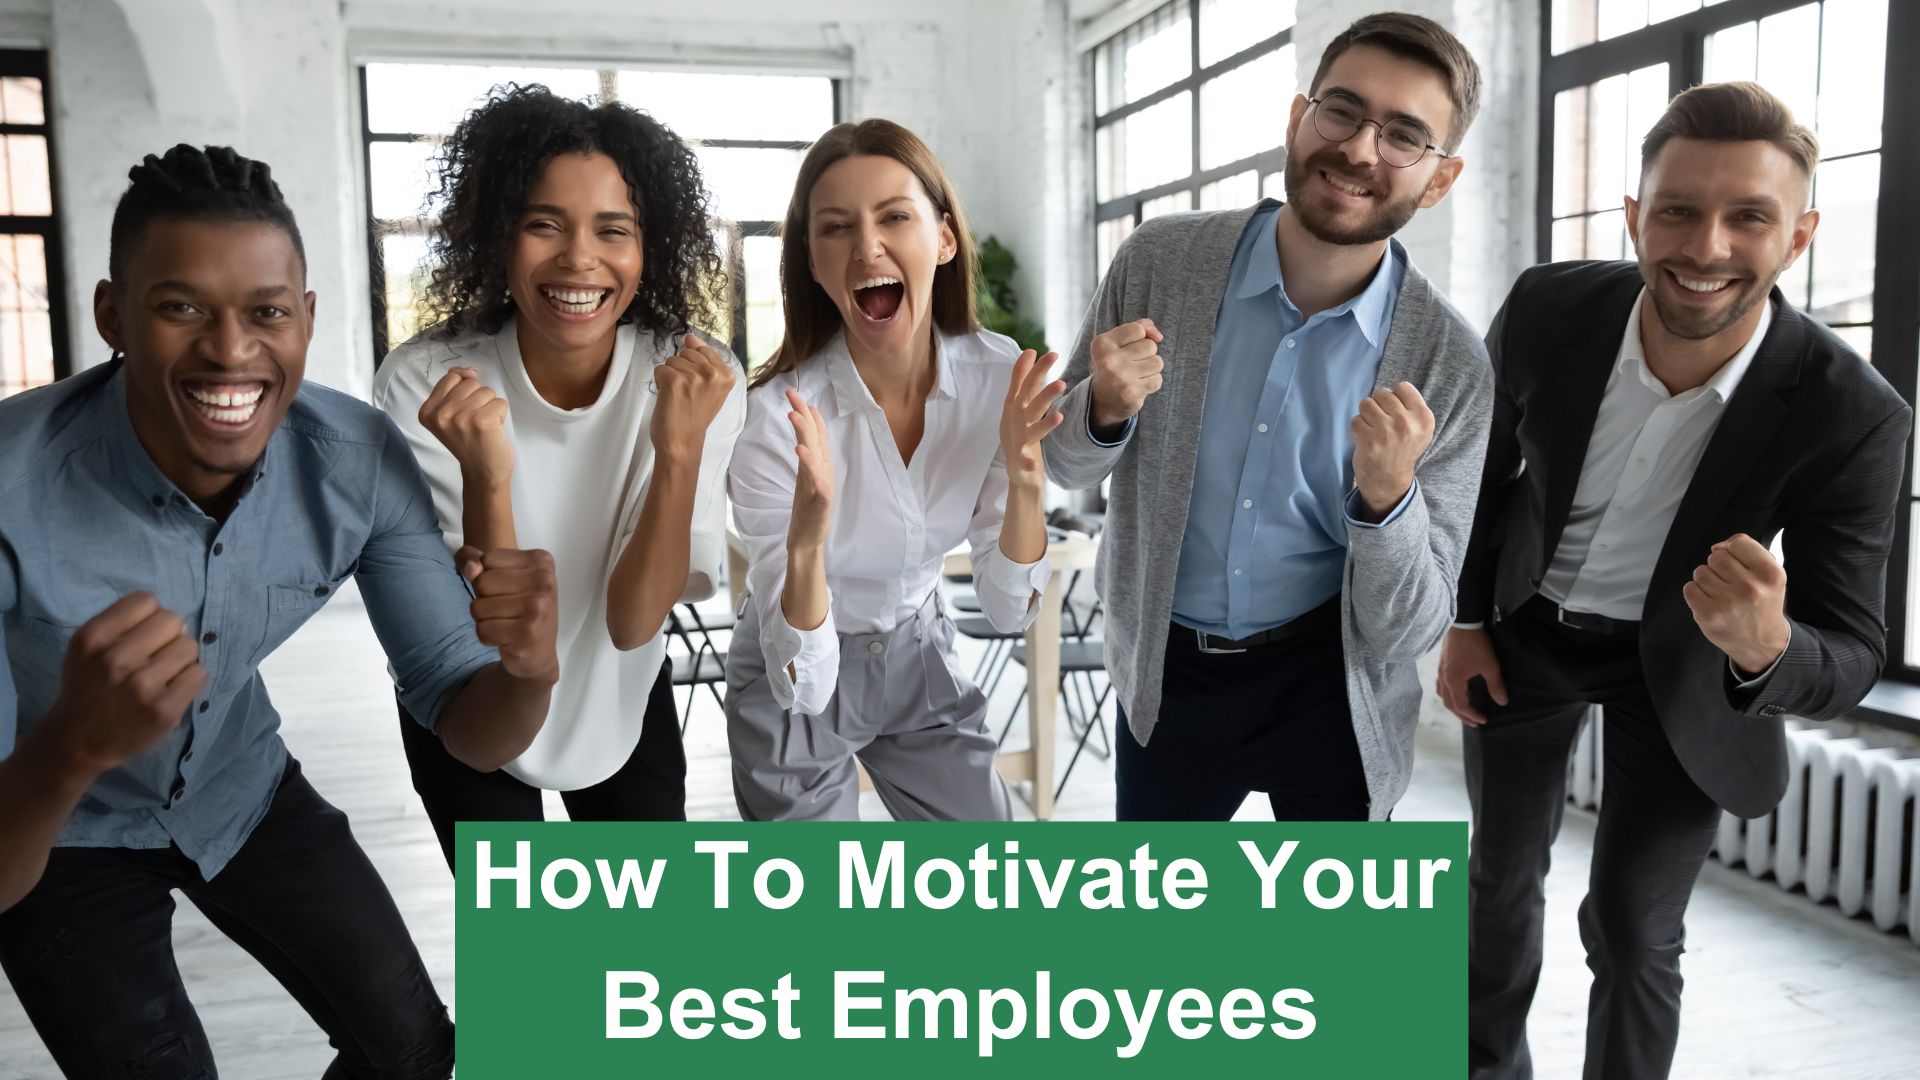 How to Motivate Your Best Employees